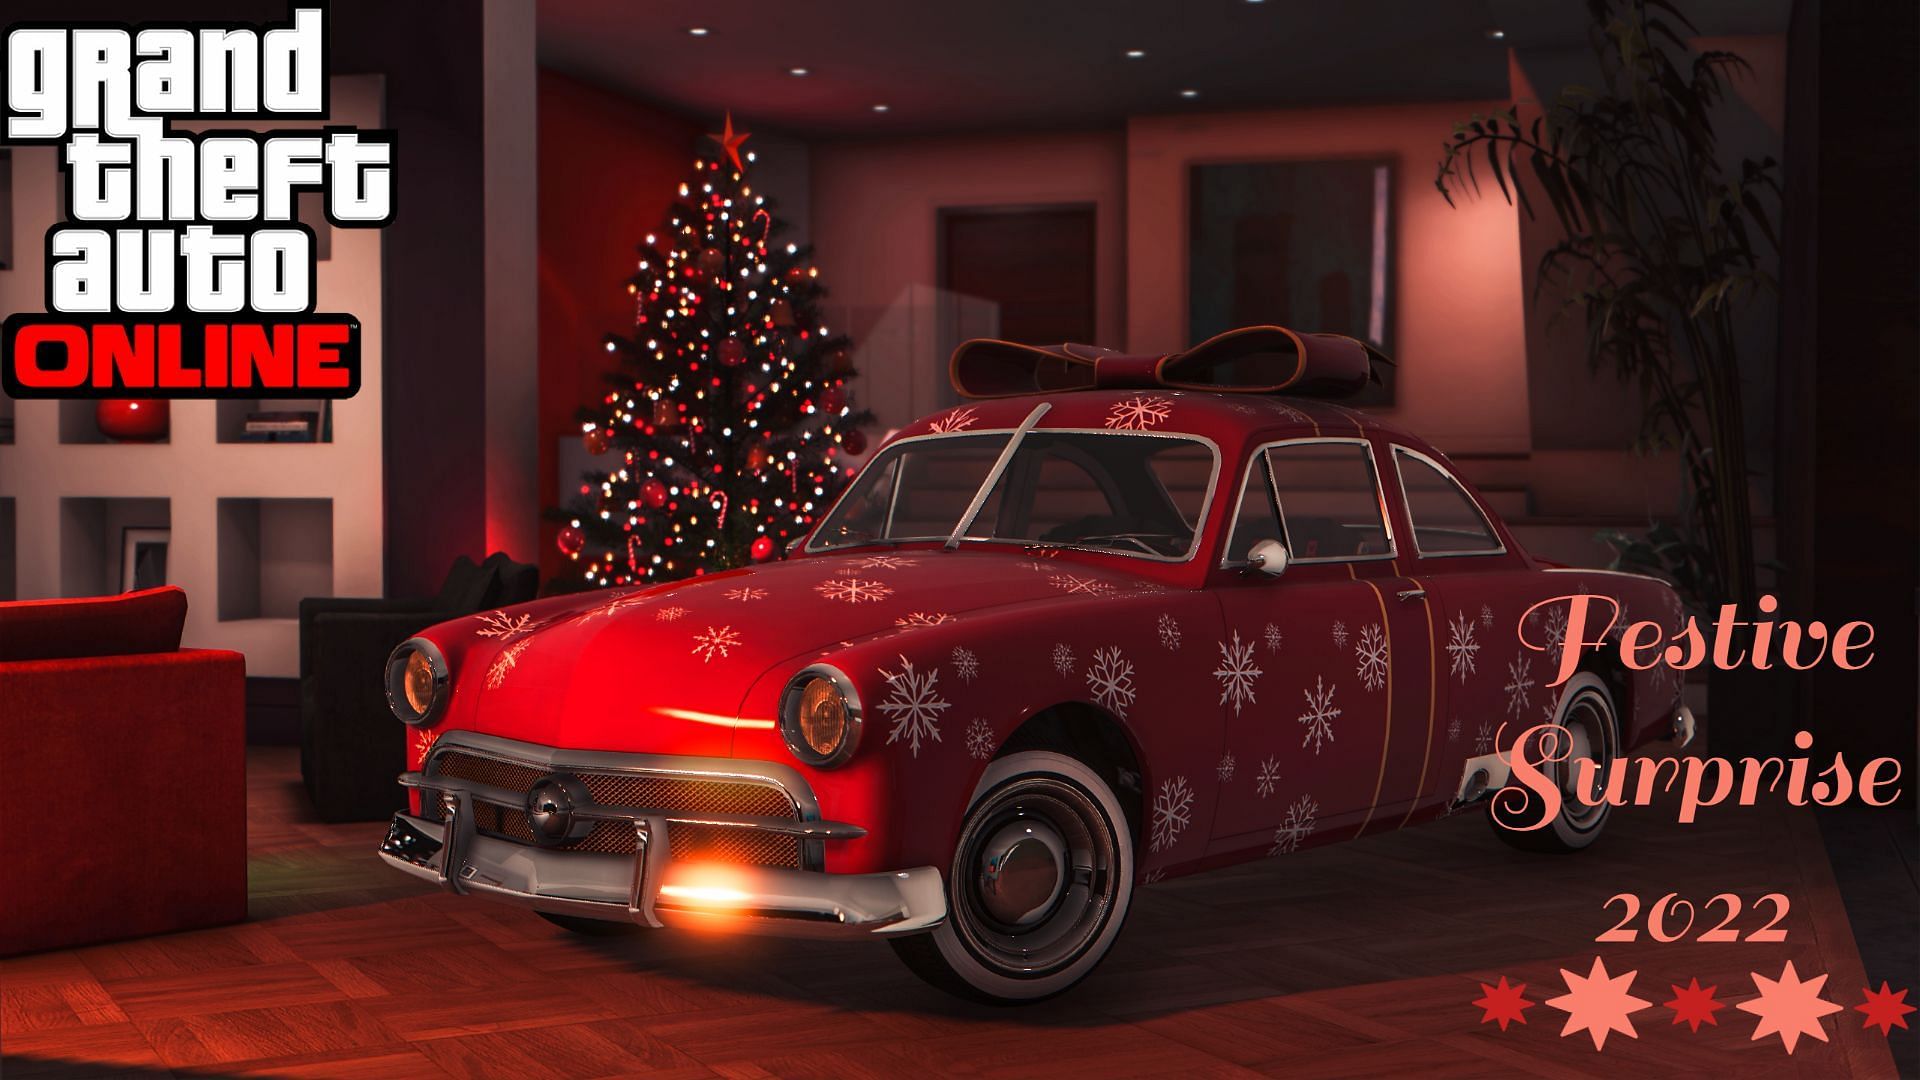 GTA When can players expect GTA Online's annual Christmas Snow update?